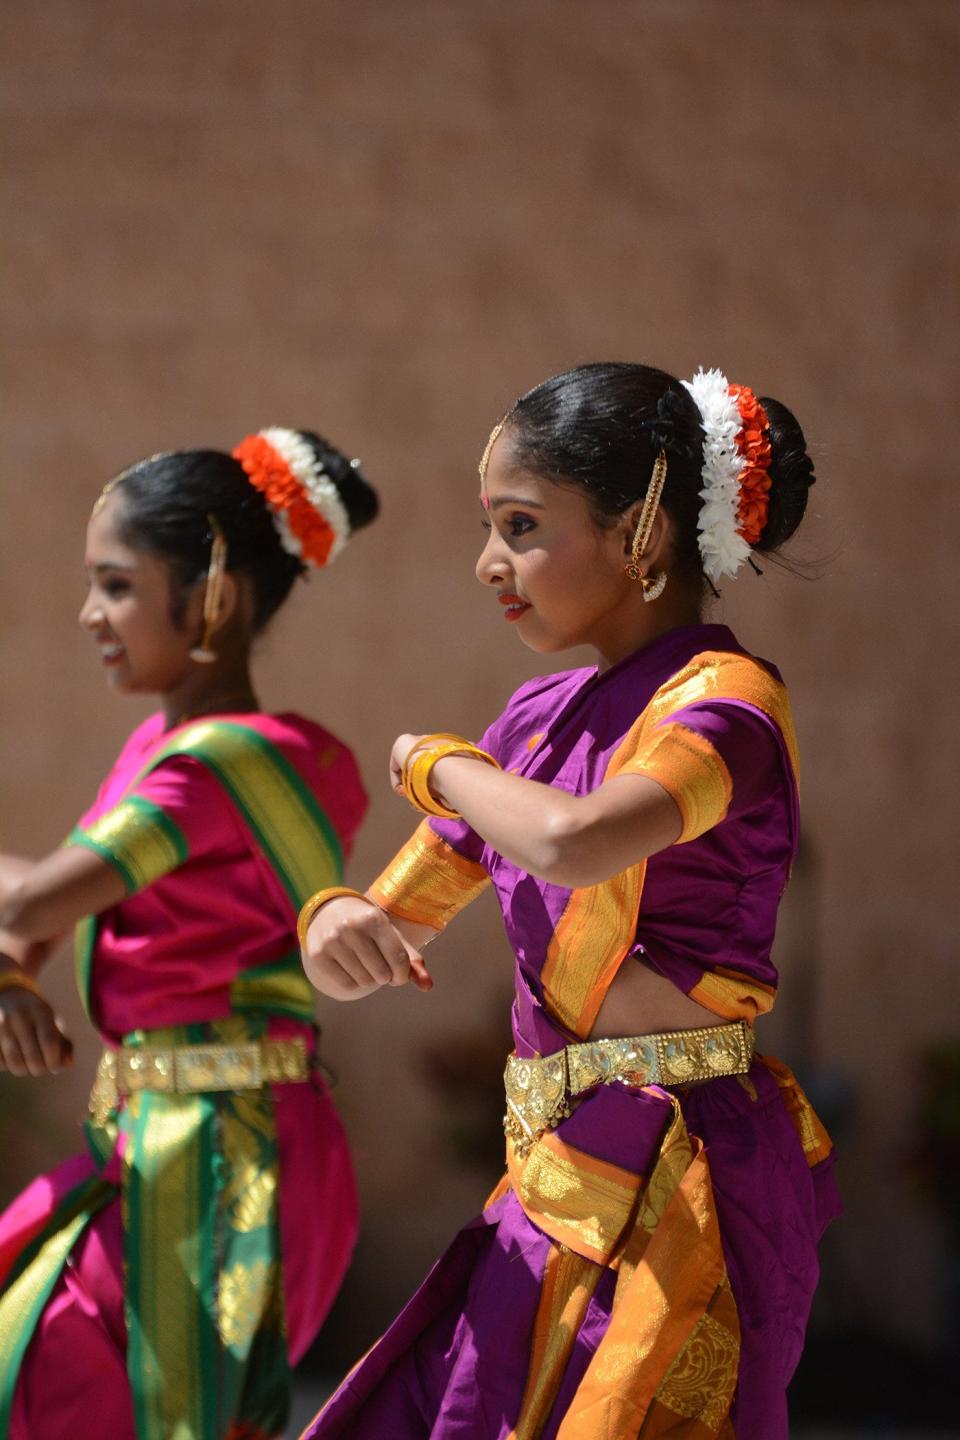 Dancers perform in the Tamil Nattapura or village style. With Indian music, dance, costumes and food, the 32nd annual India Fest took place Saturday, March 23 at the Estero Recreation Center, presented by the India Association of Ft. Myers. 